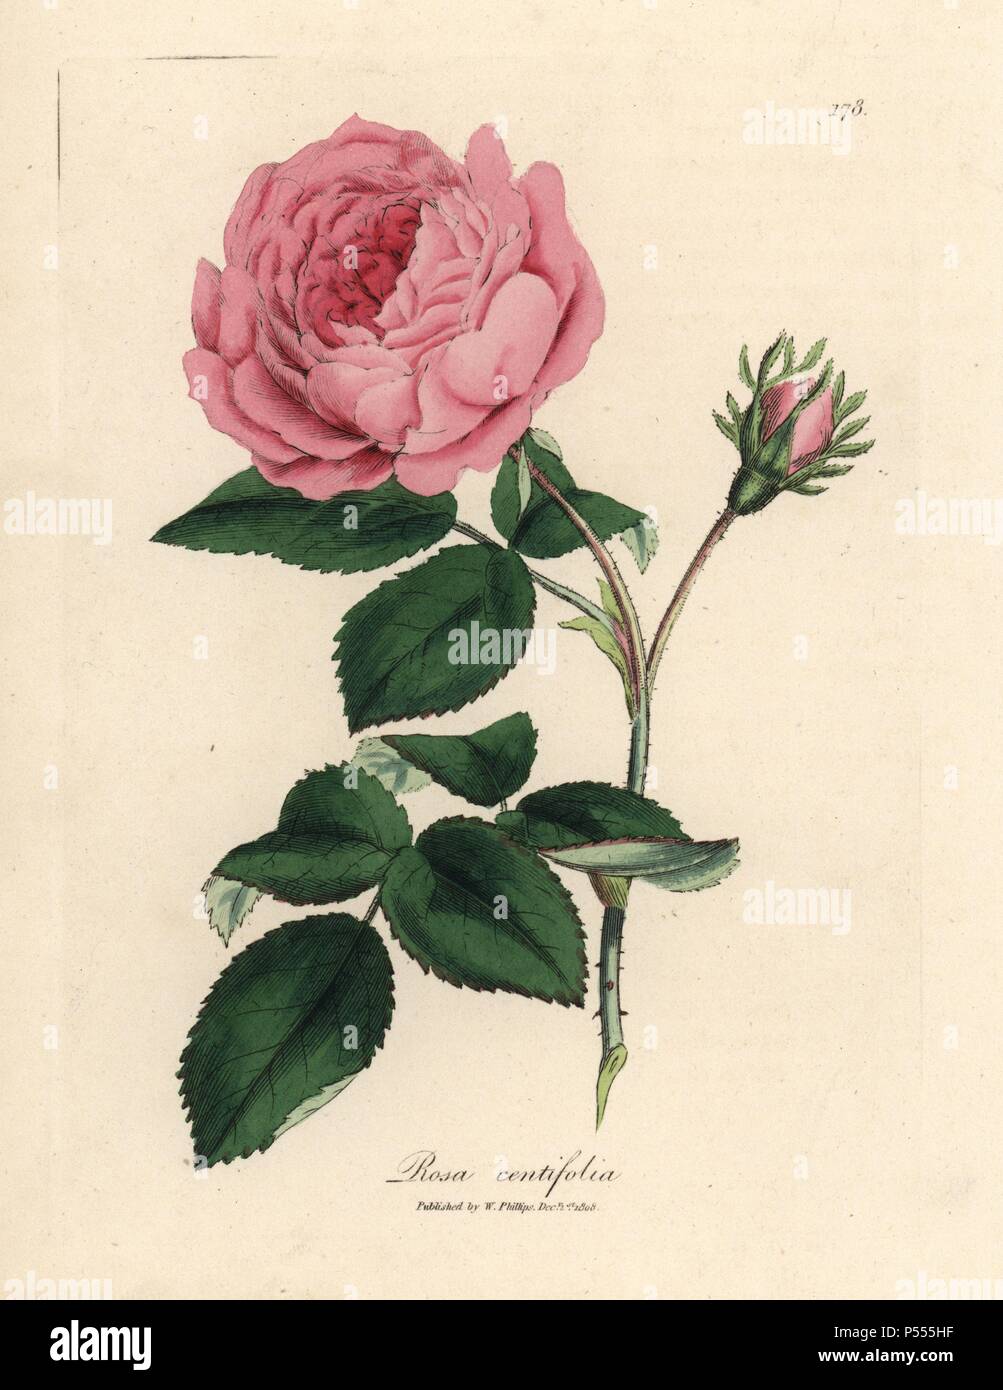 Large pink hundred-leaved rose, Rosa centifolia. Handcolored copperplate engraving from a botanical illustration by James Sowerby from William Woodville and Sir William Jackson Hooker's 'Medical Botany' 1832. The tireless Sowerby (1757-1822) drew over 2,500 plants for Smith's mammoth 'English Botany' (1790-1814) and 440 mushrooms for 'Coloured Figures of English Fungi ' (1797) among many other works. Stock Photo